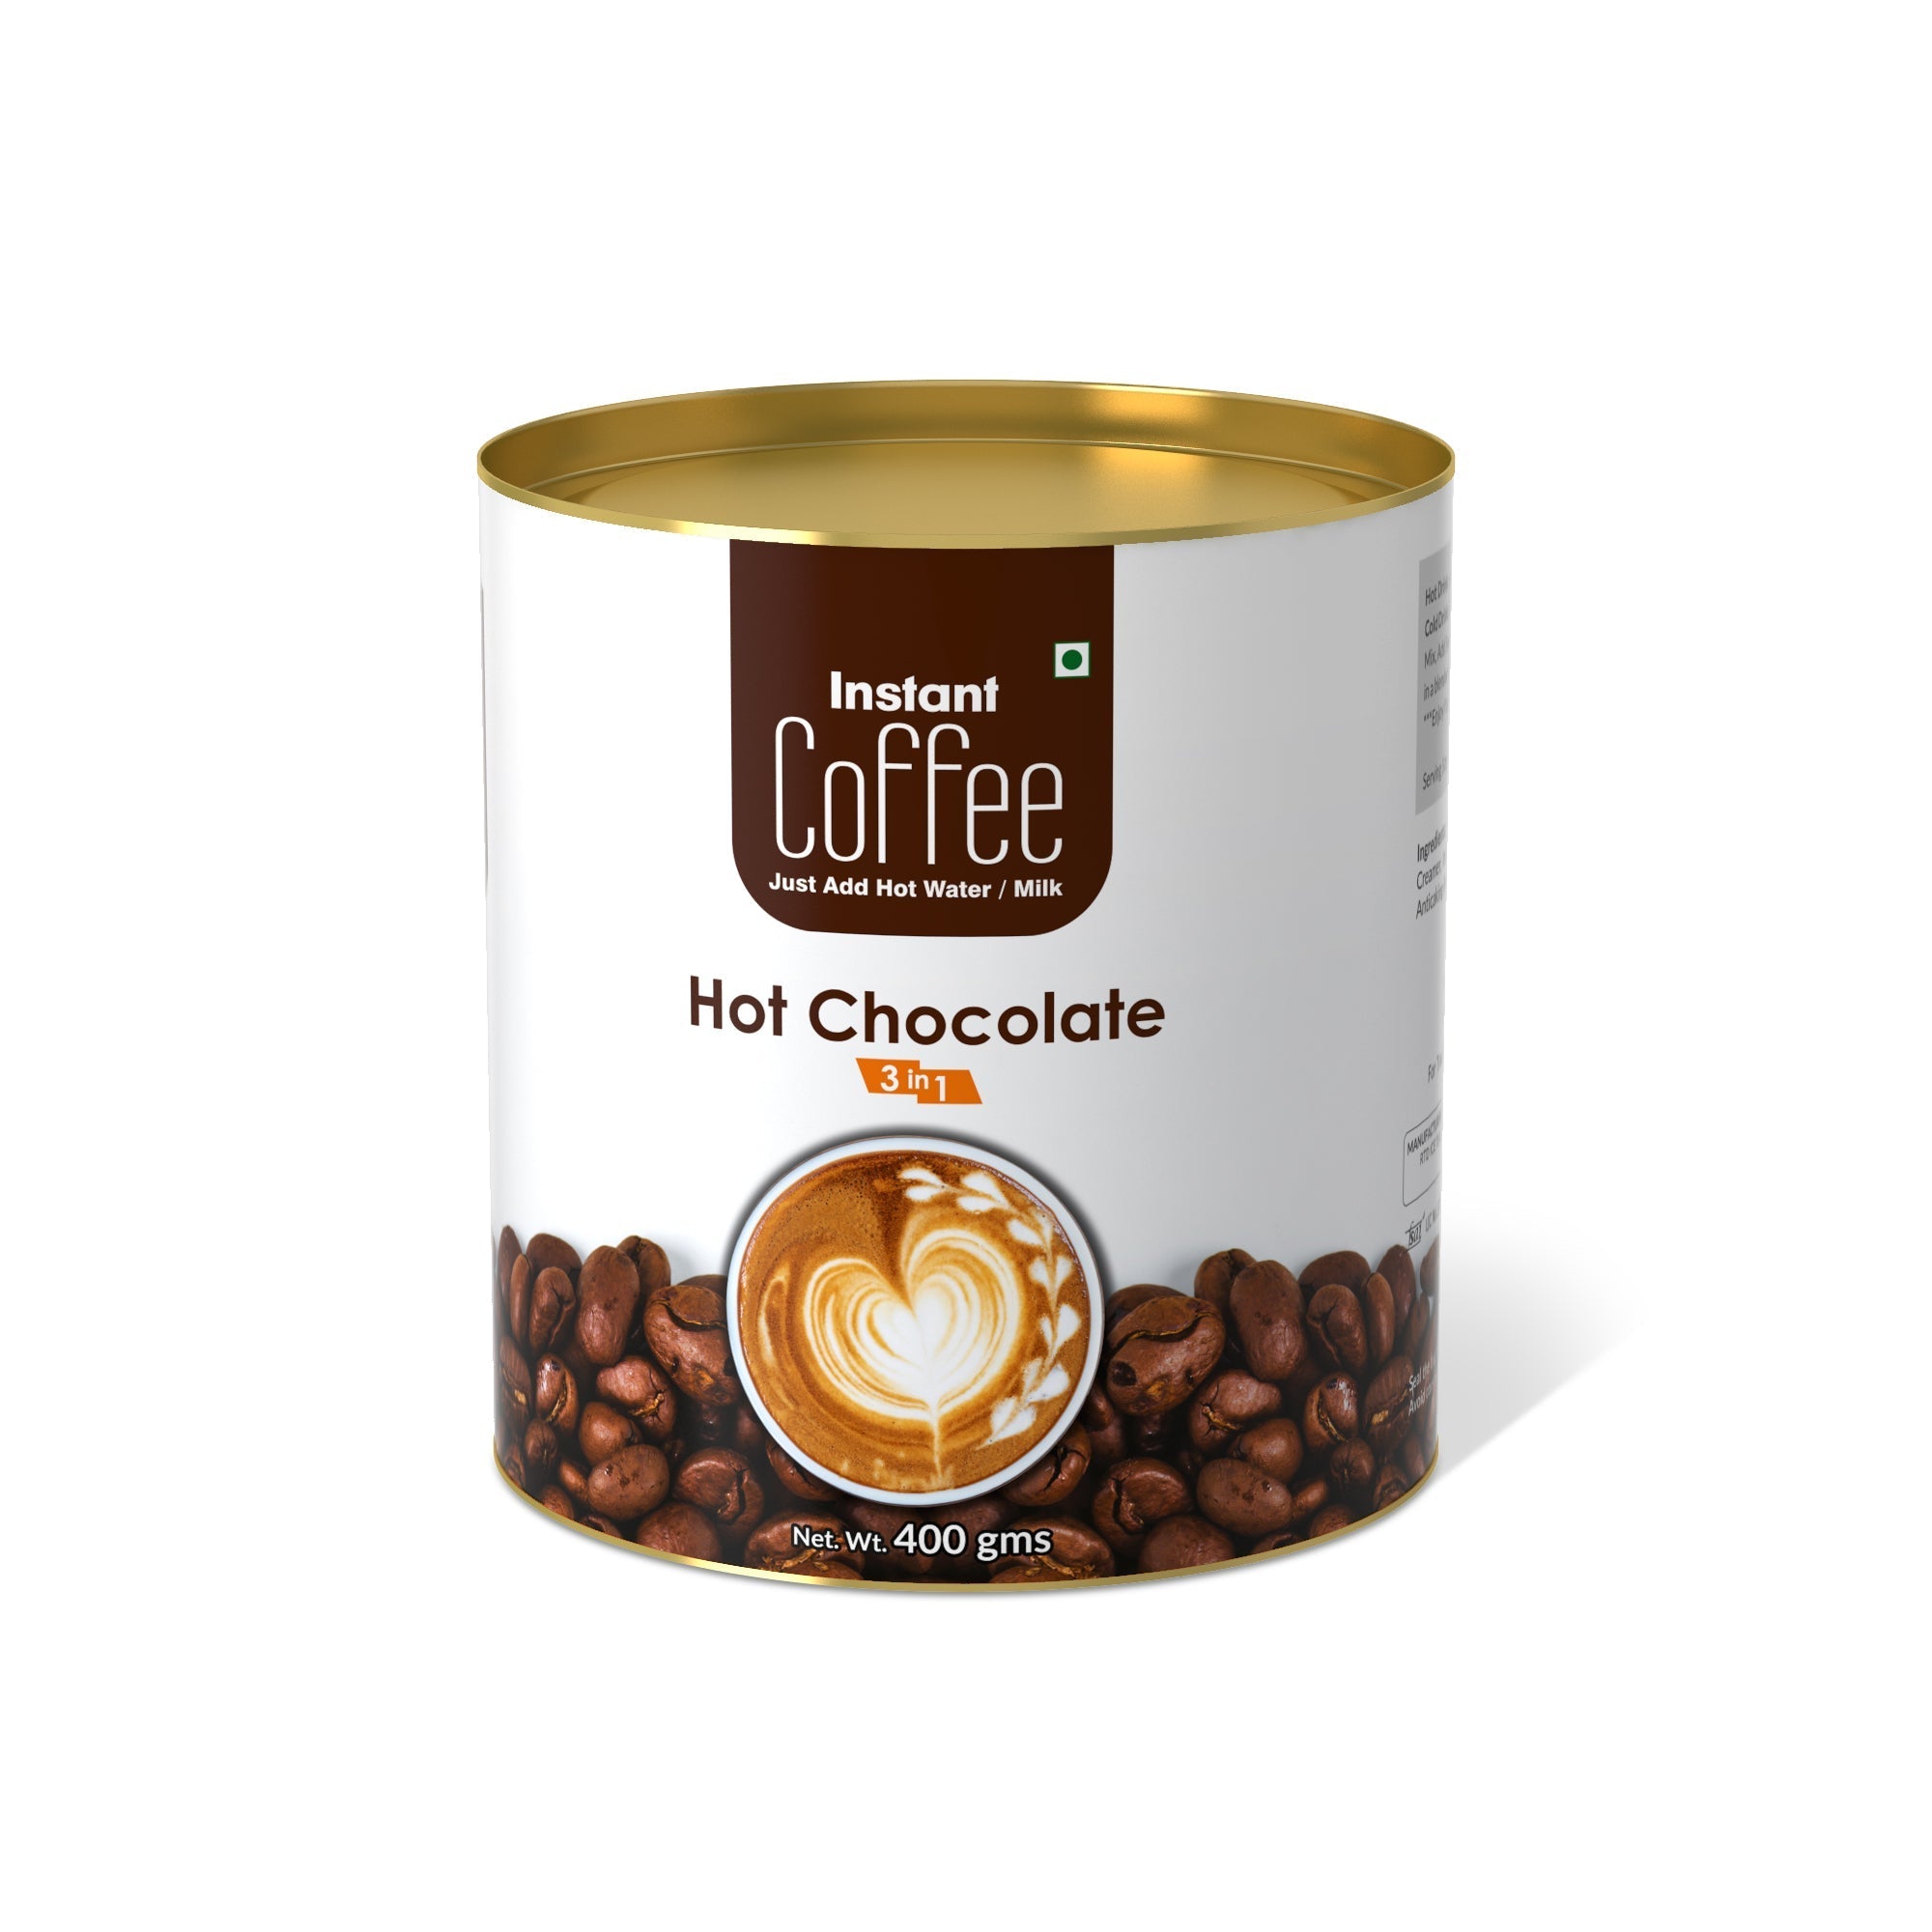 Hot Chocolate Instant Coffee Premix (3 in 1) - 400 gms